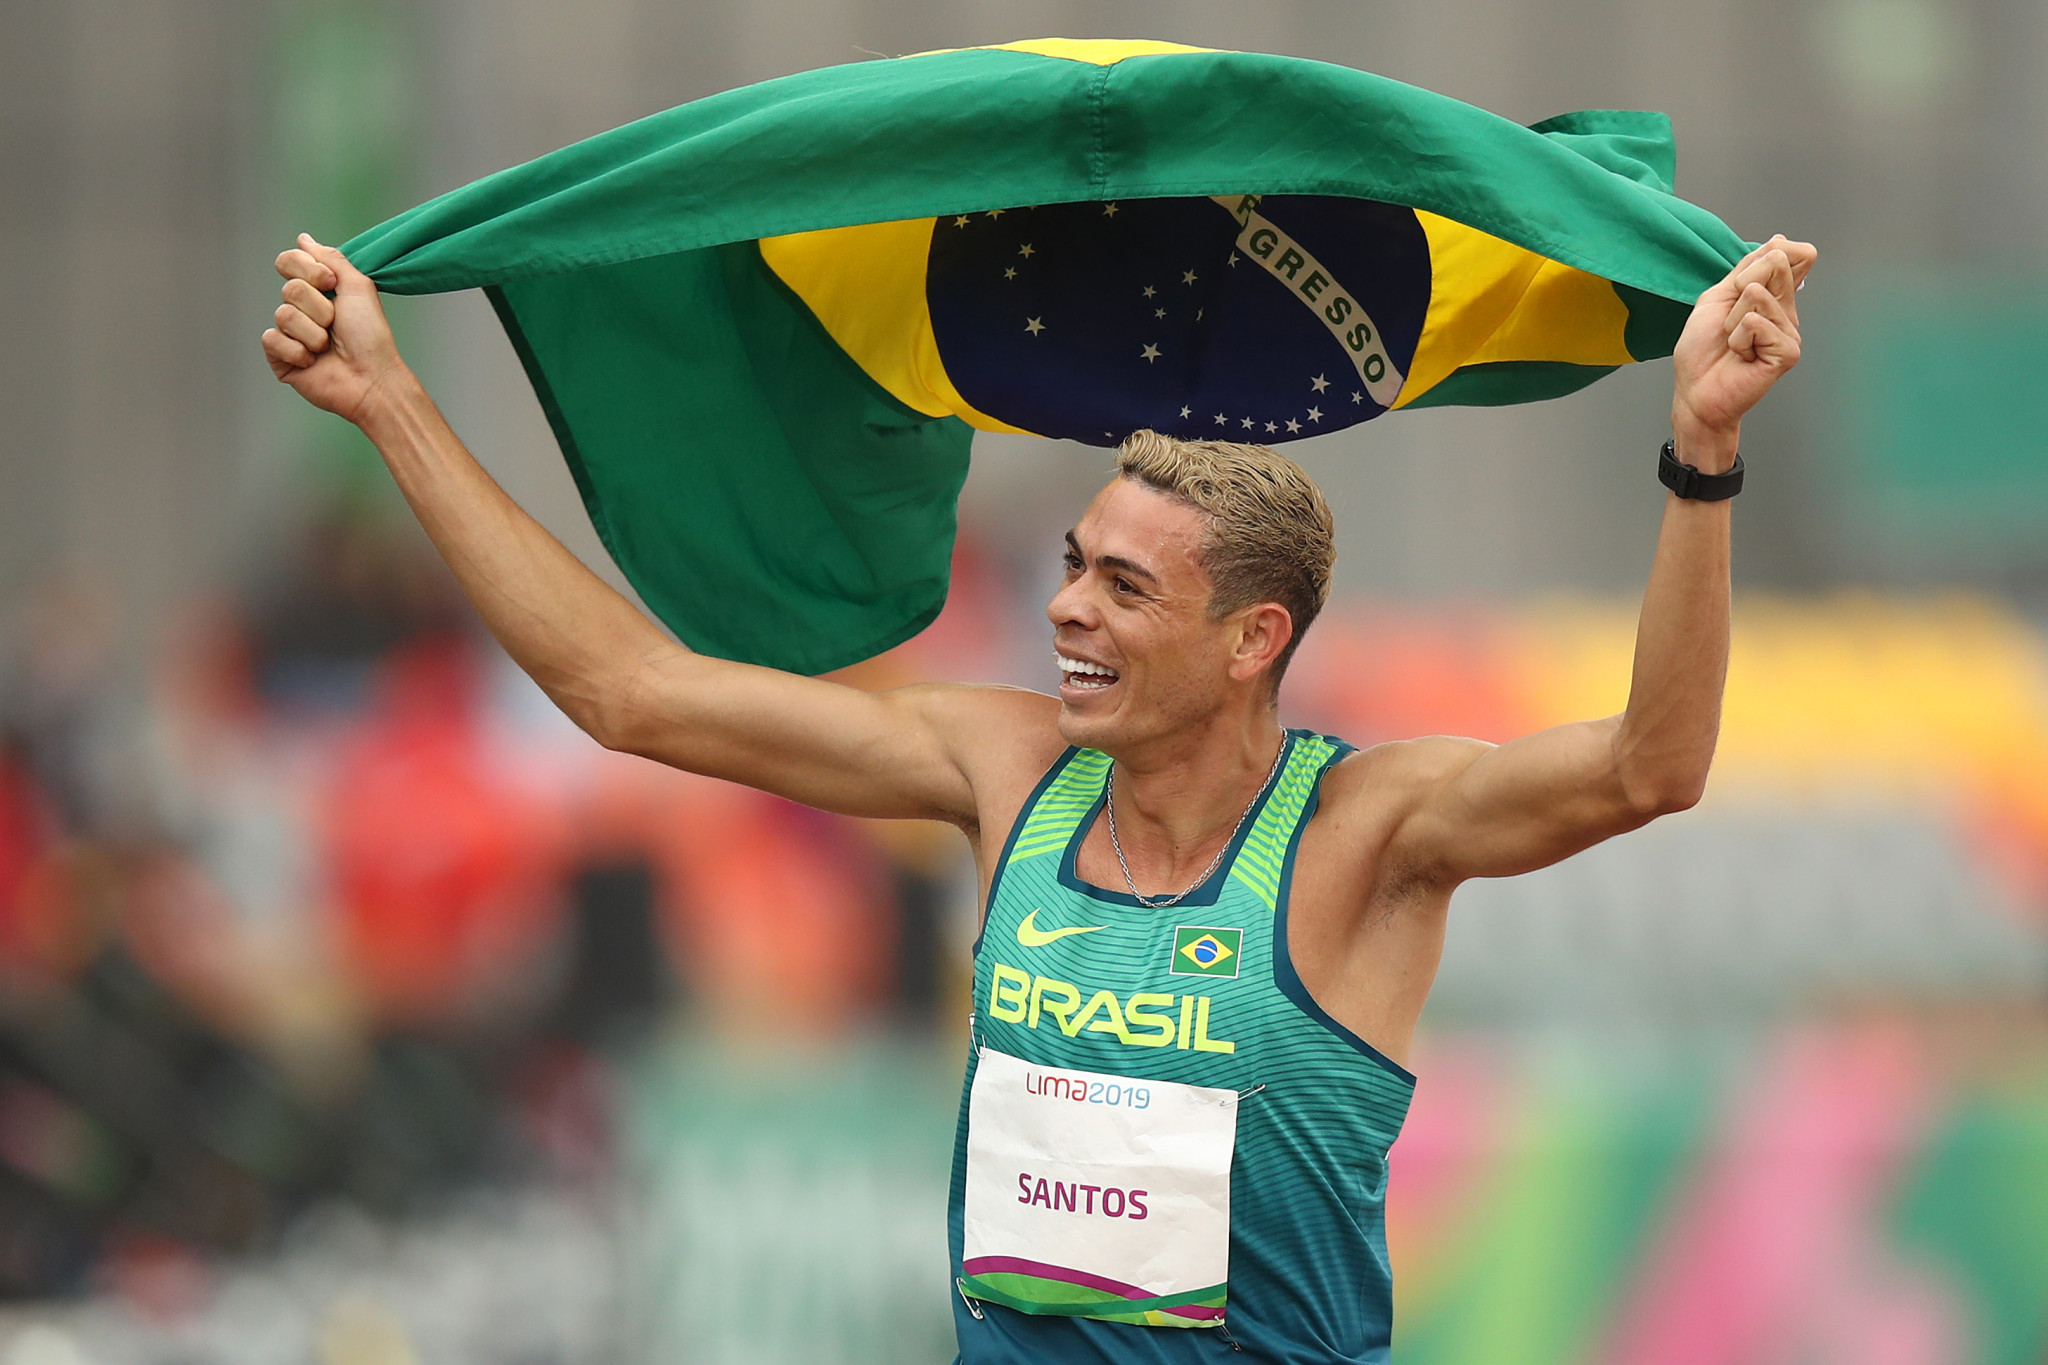 Brazilian Olympic Committee to begin sending athletes to Portugal for training 